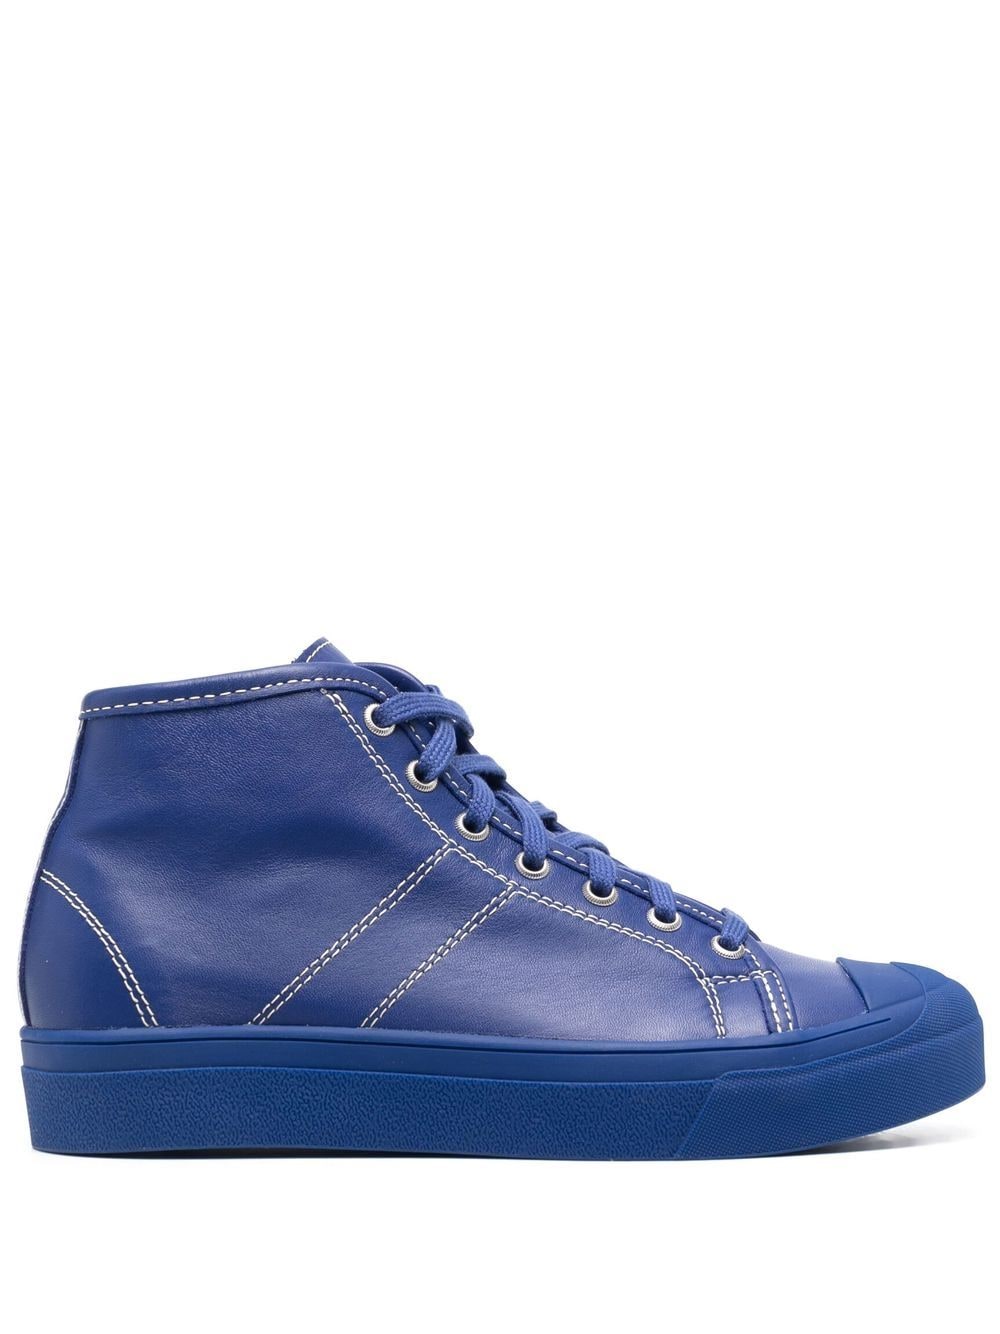 Sofie D'hoore Foster high-top Sneakers - Farfetch